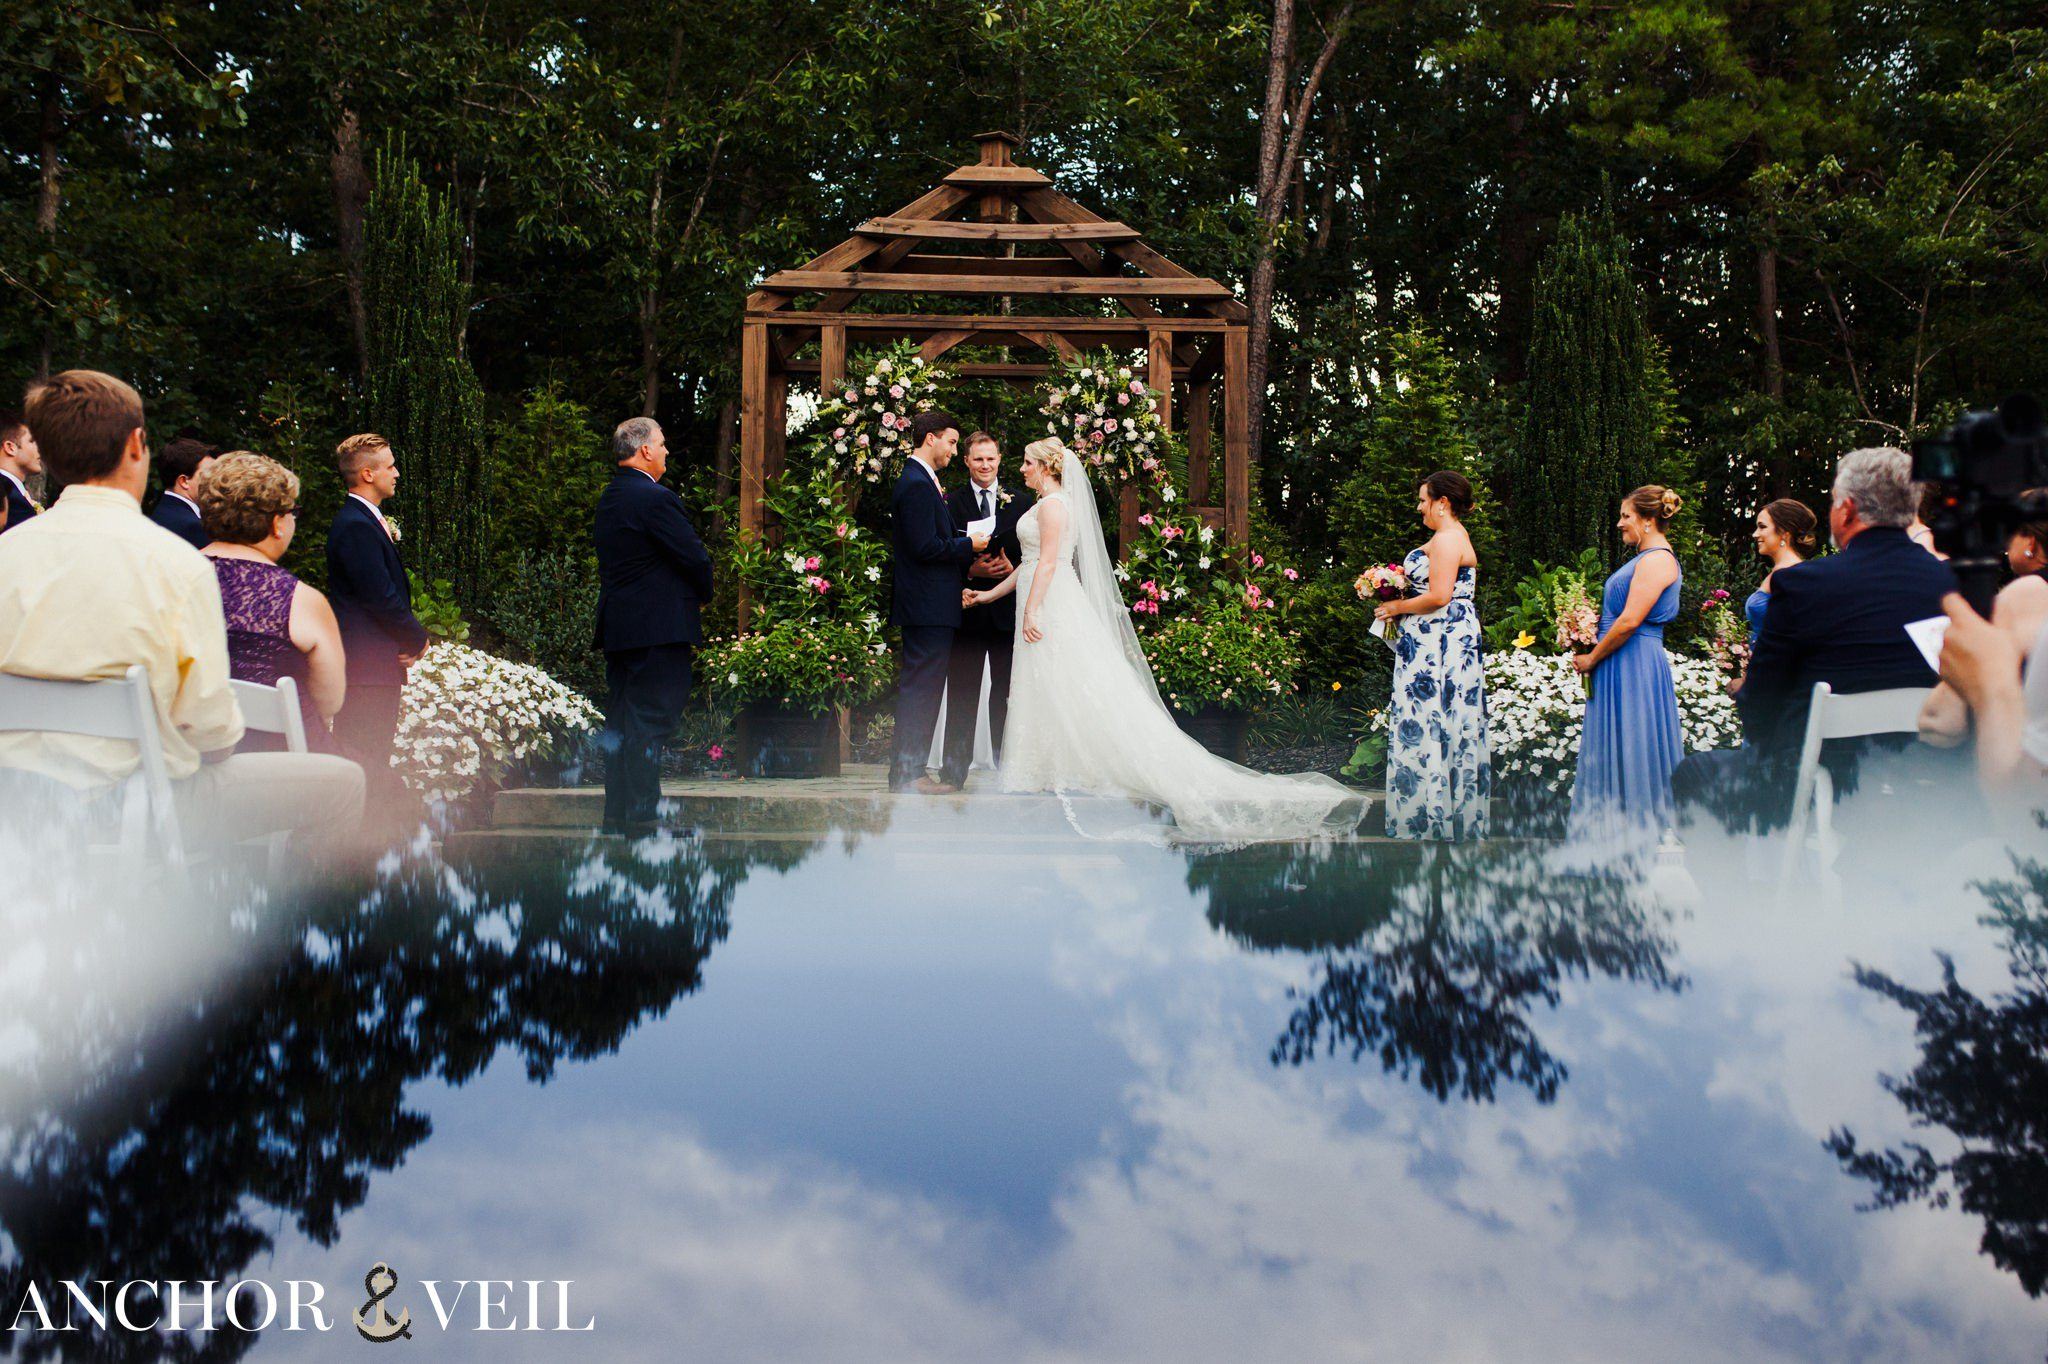 Sky reflection during the ceremony